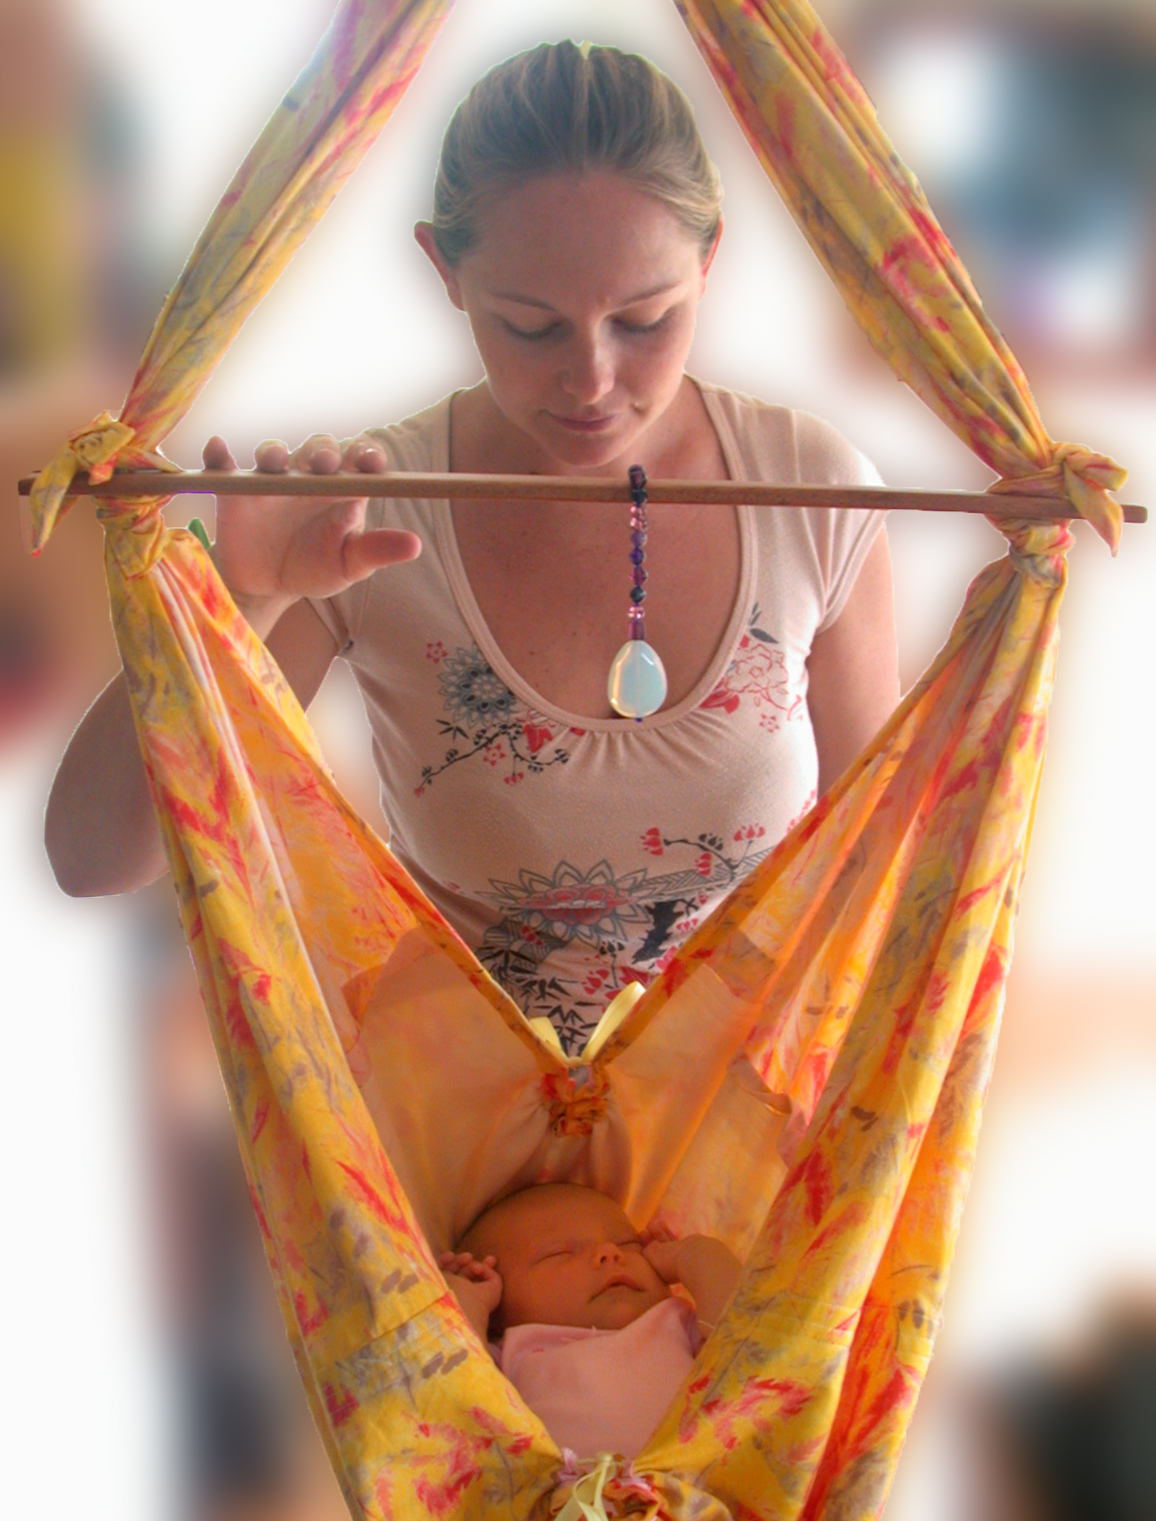 Melanaea Mather, Special Delivery Baby Hammock, Special Delivery Baby Hammock Kea’au, baby hammock, special delivery, womb to world, infant hammock, toddler hammock, organic, organic hammock, hammock hardware, holistic, 100% cotton, Mid-Wife, sling bed, Self-soothing, Peace, Kea’au, Hawaii